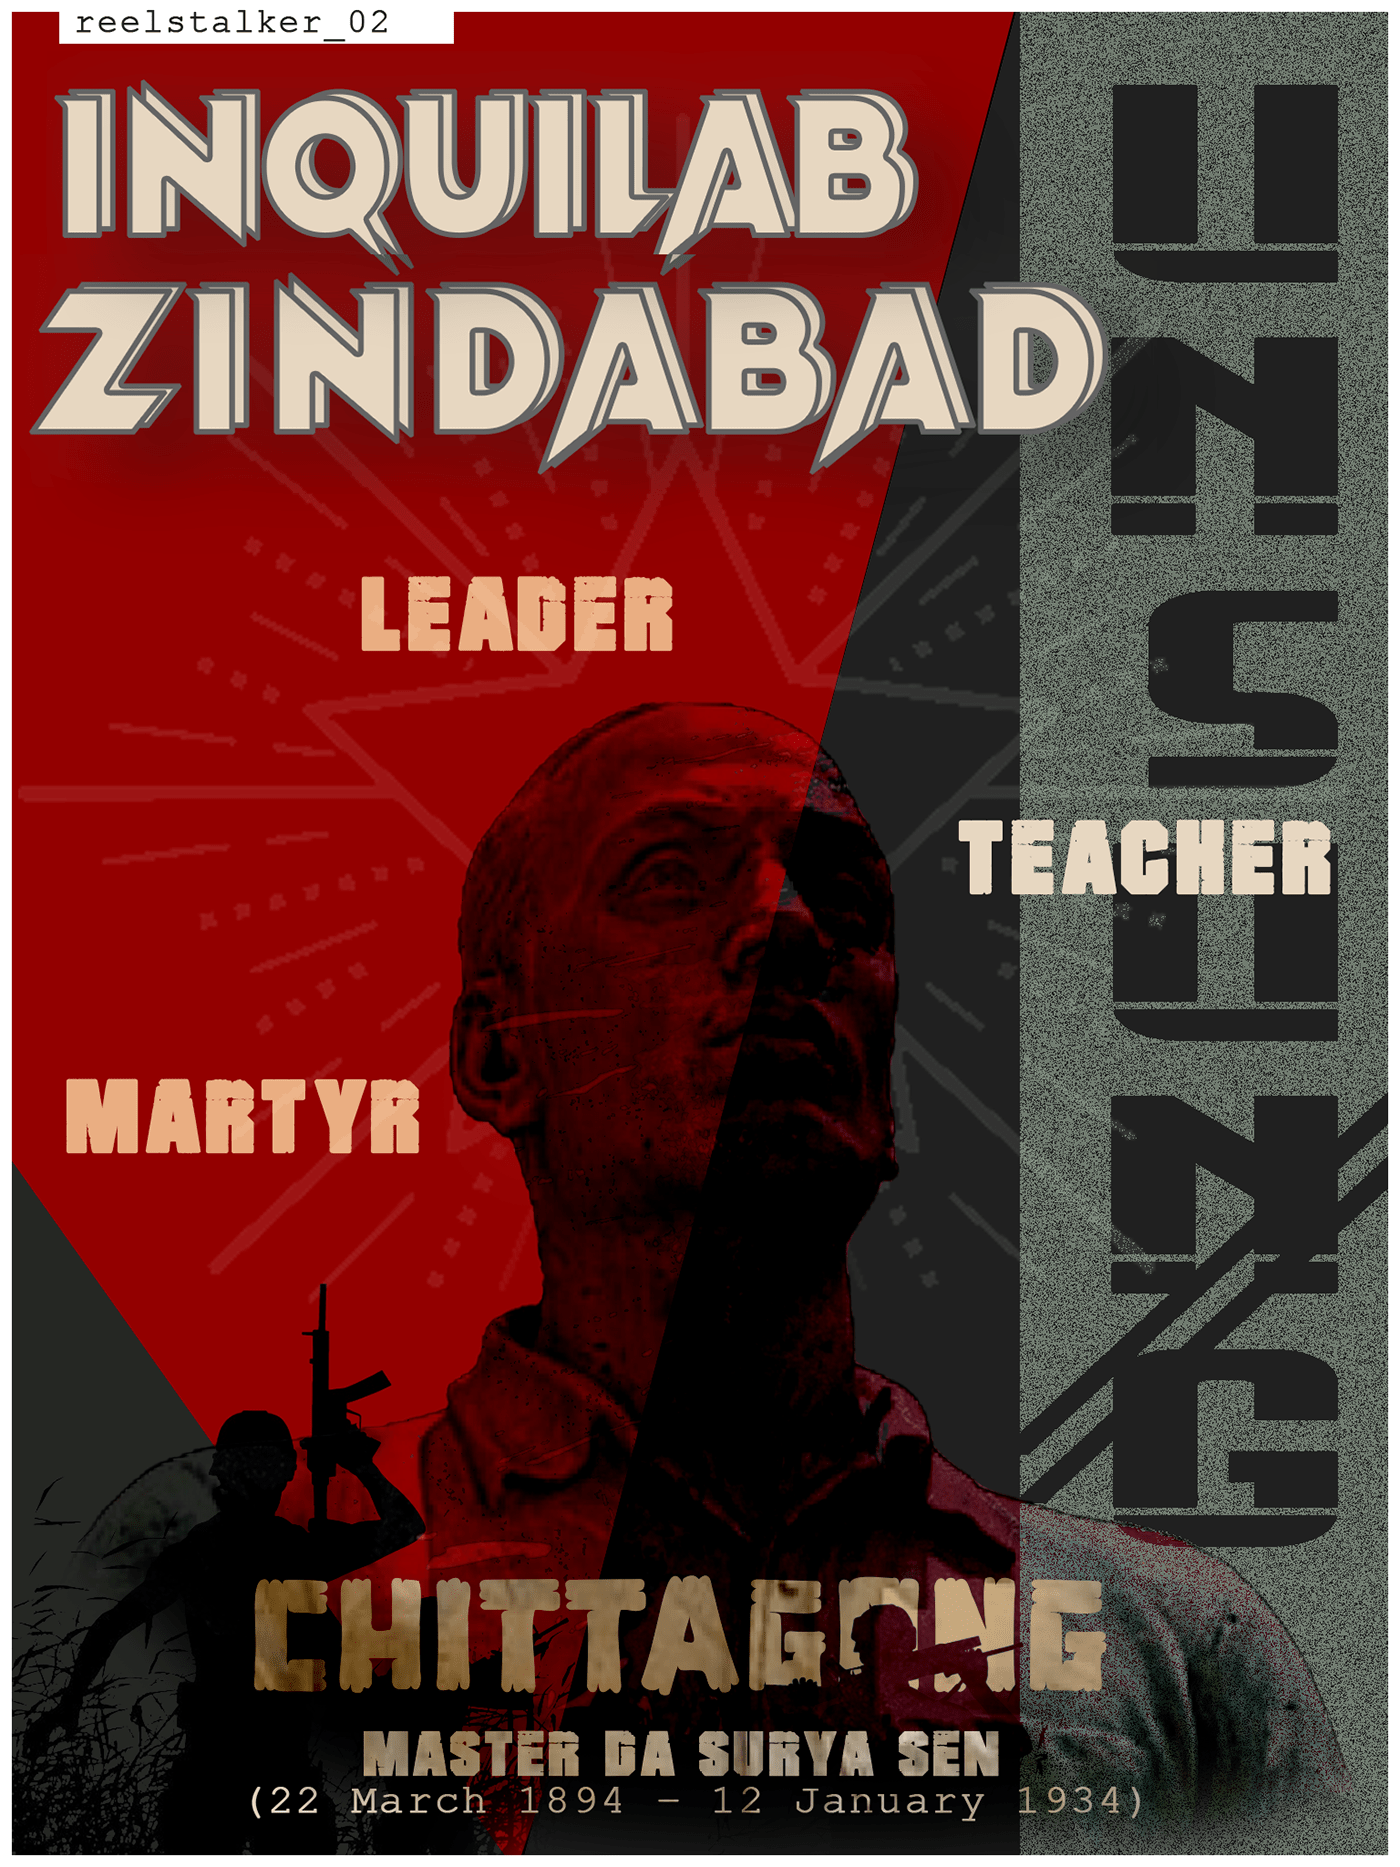 This poster was made as a tribute to our own revolutionary leader Master Da Surya Sen.  Inquilabi!